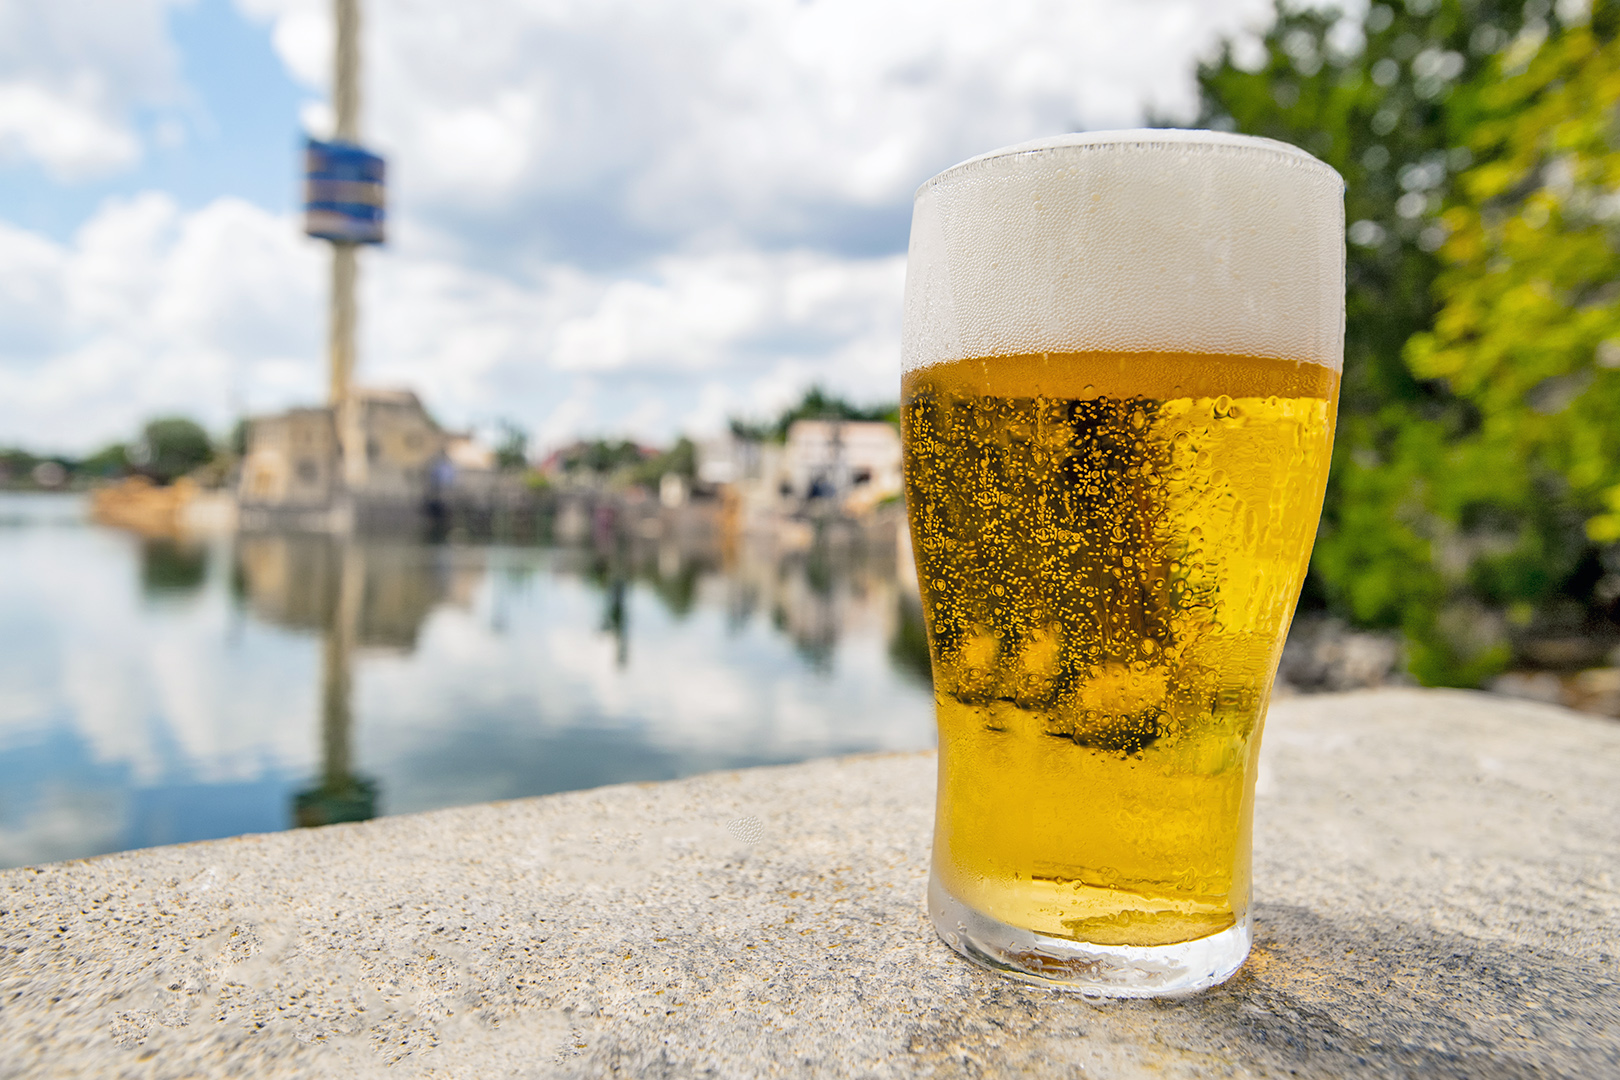 Free Beer is Back for 2019 at SeaWorld Orlando